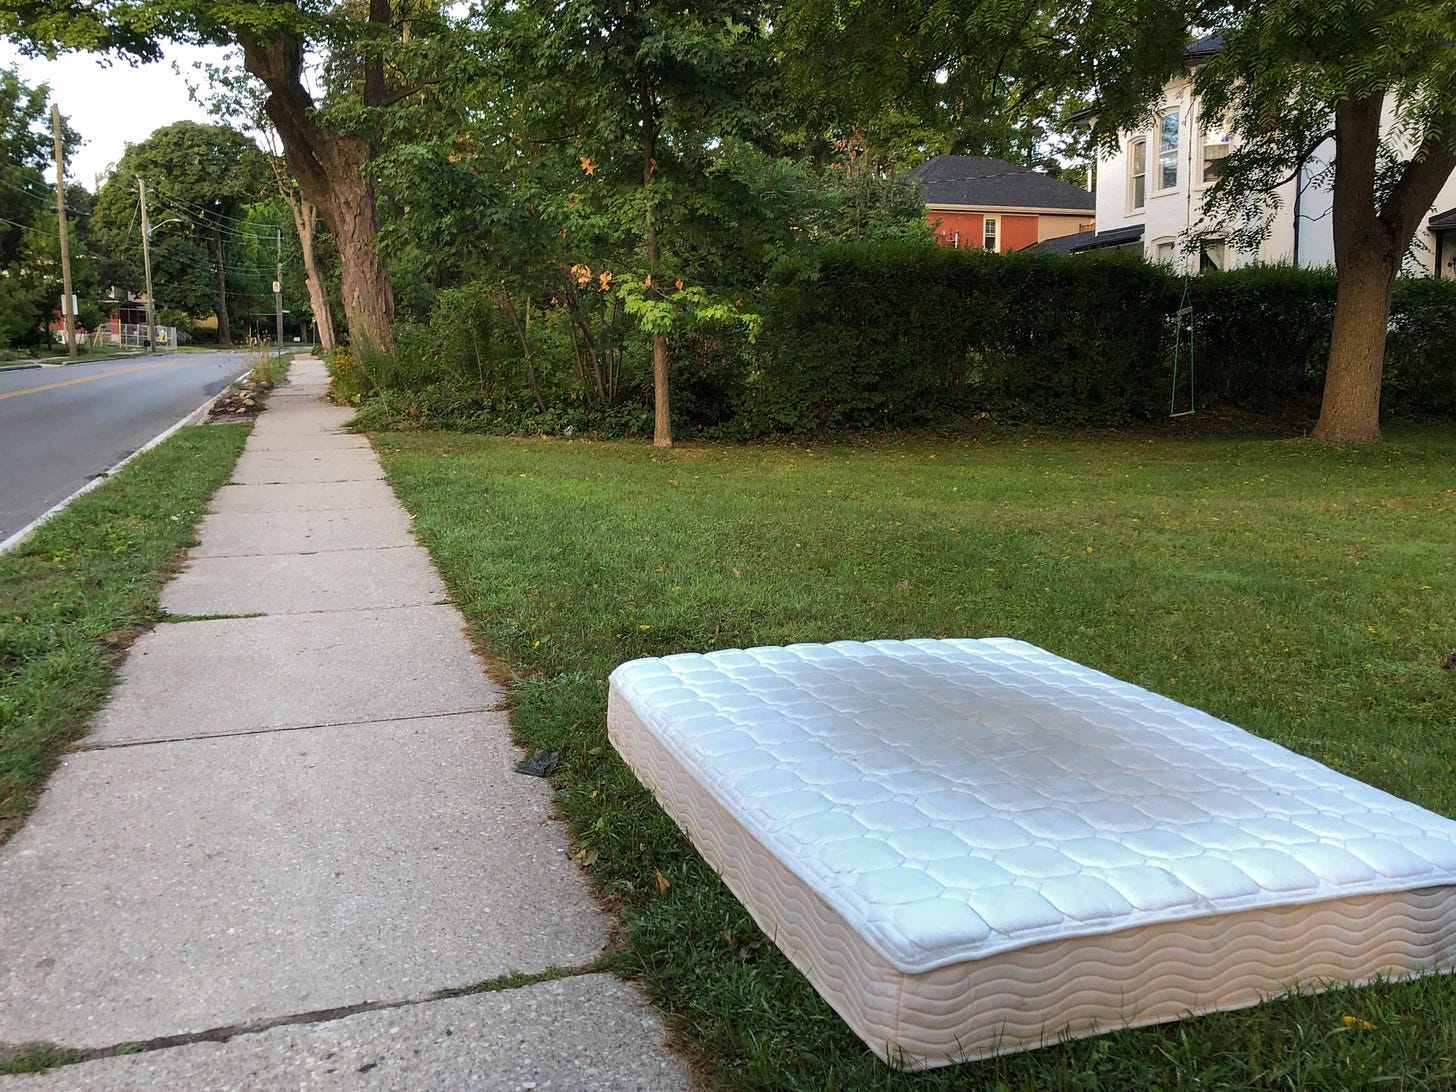 A mattress lies abandoned on grass by the side of a road the first spring of pandemic. Photo credit: Nancy Forde. All right reserved. nancyforde.com